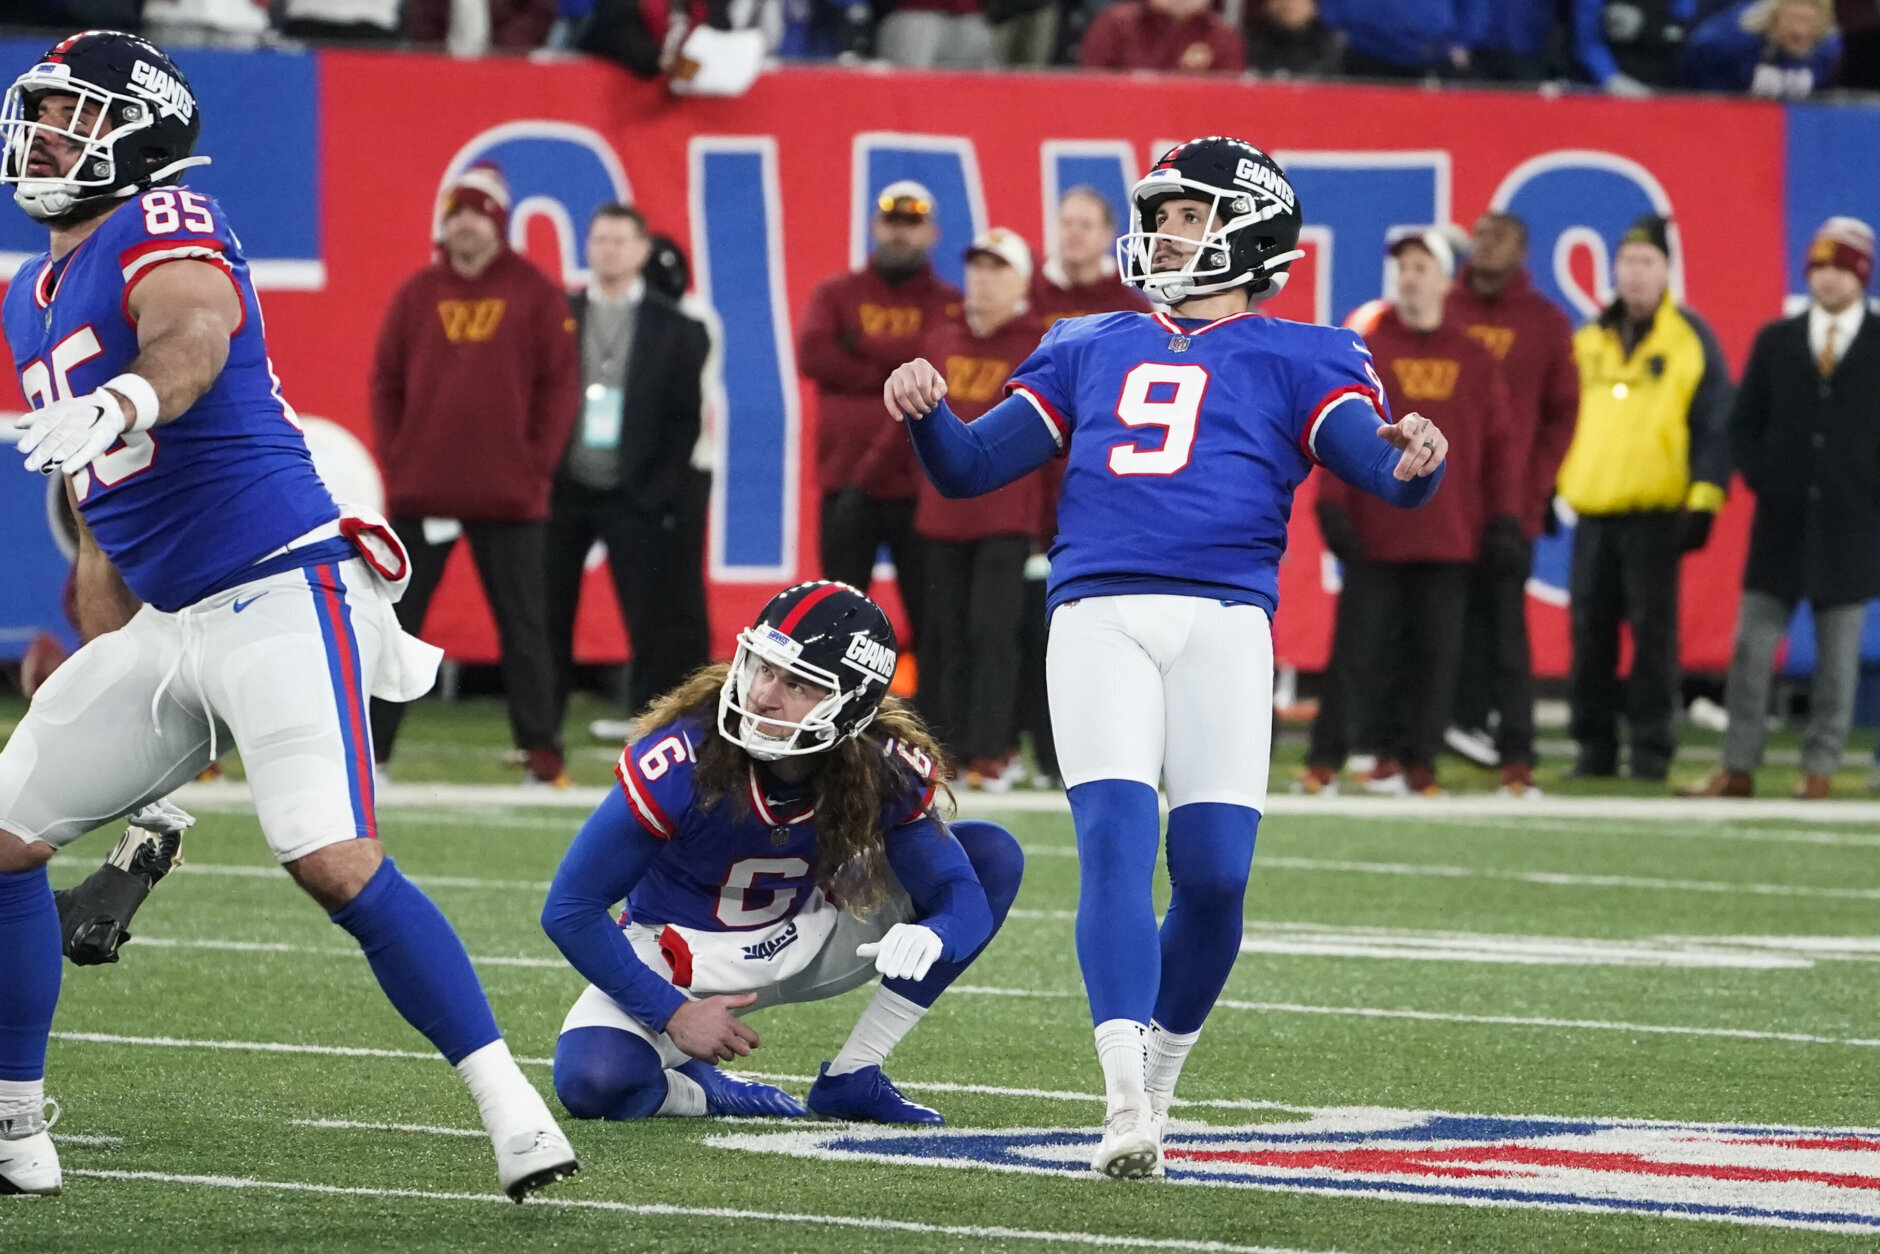 New York Giants kicker Graham Gano, right, looks after his field goal during overtime of an NFL football game against the Washington Commanders, Sunday, Dec. 4, 2022, in East Rutherford, N.J. The kick missed and the game ended in a tie. (AP Photo/John Minchillo)